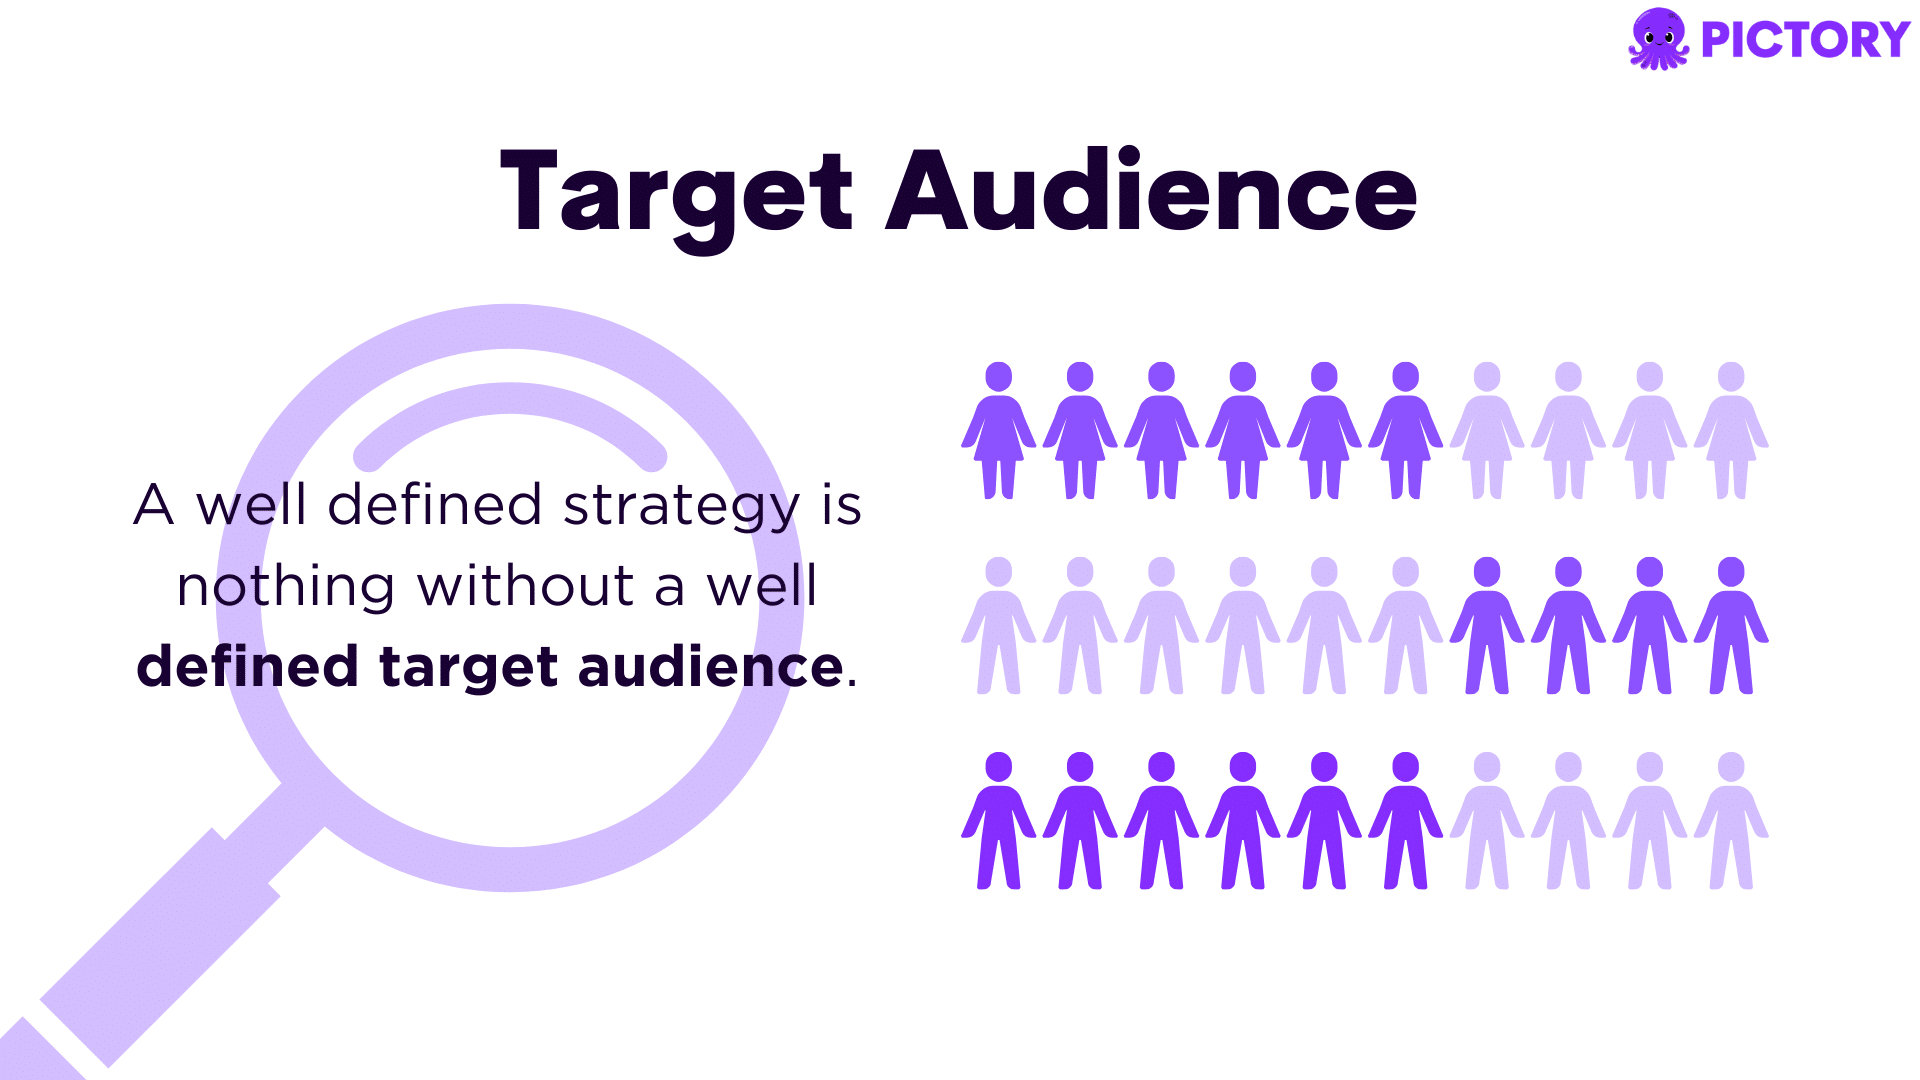 A well-defined strategy is nothing without a well-defined target audience.